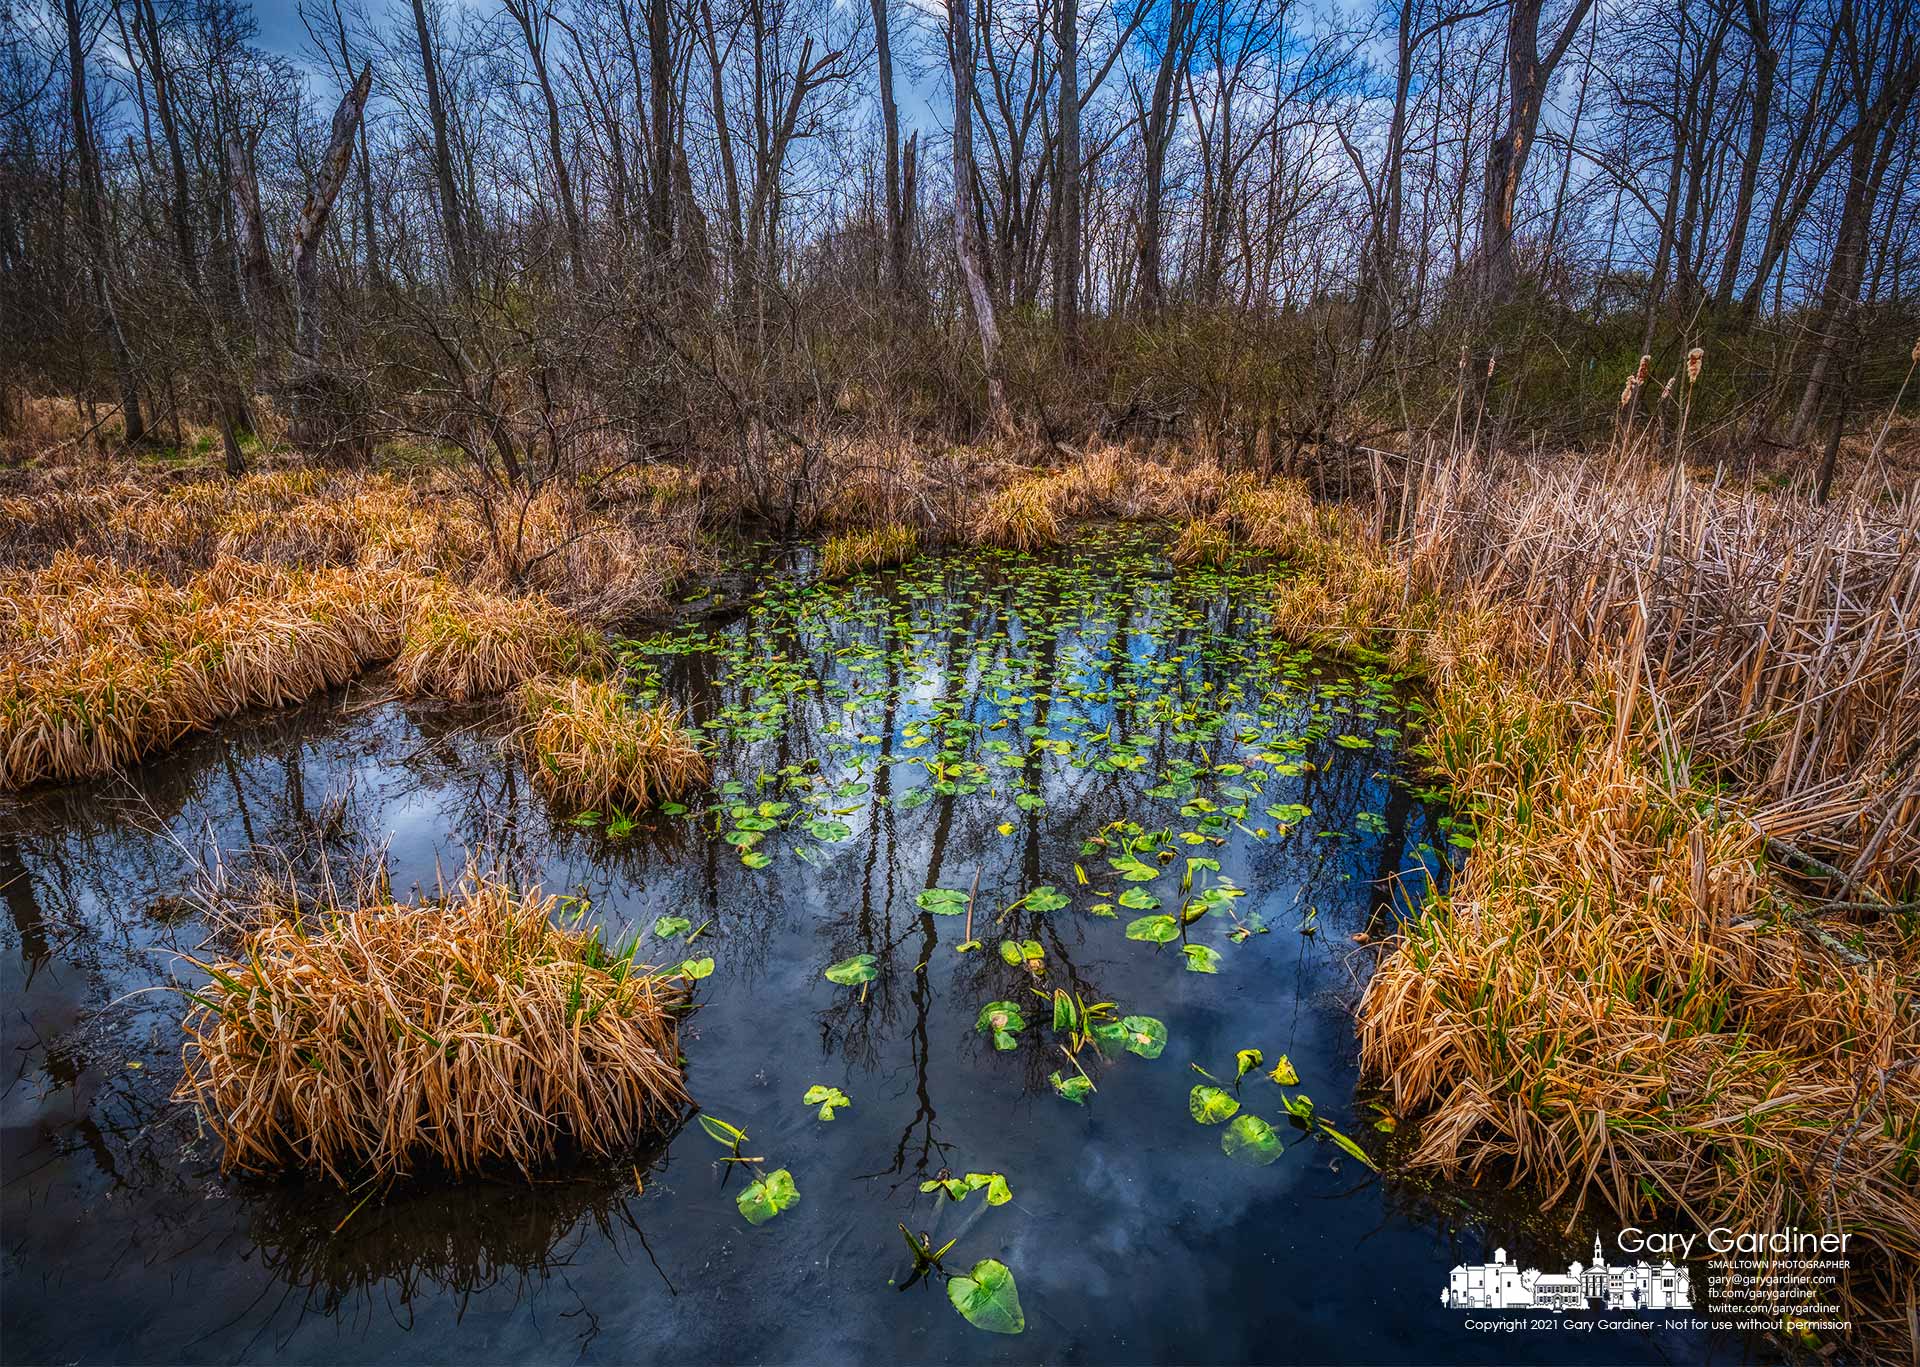 Lilypads begin to show themselves on the smooth waters of Boyer Nature Preserve as the hours of the day are warmer and longer encouraging Spring growth in the wetland. My Final Photo for April 1, 2021.